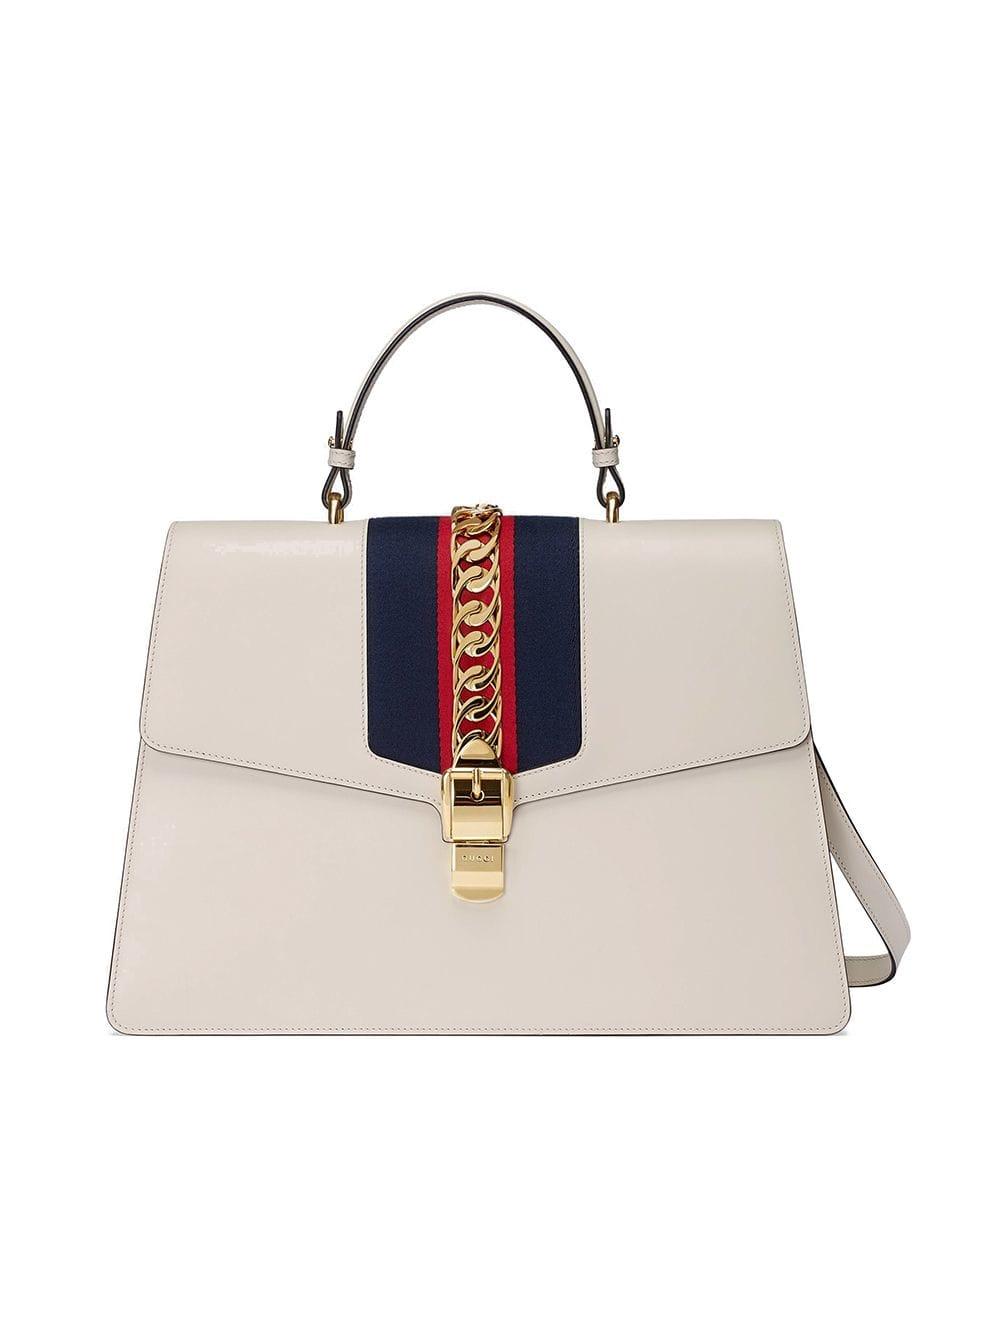 Gucci Sylvie Leather Large Top Handle Bag in White | Lyst